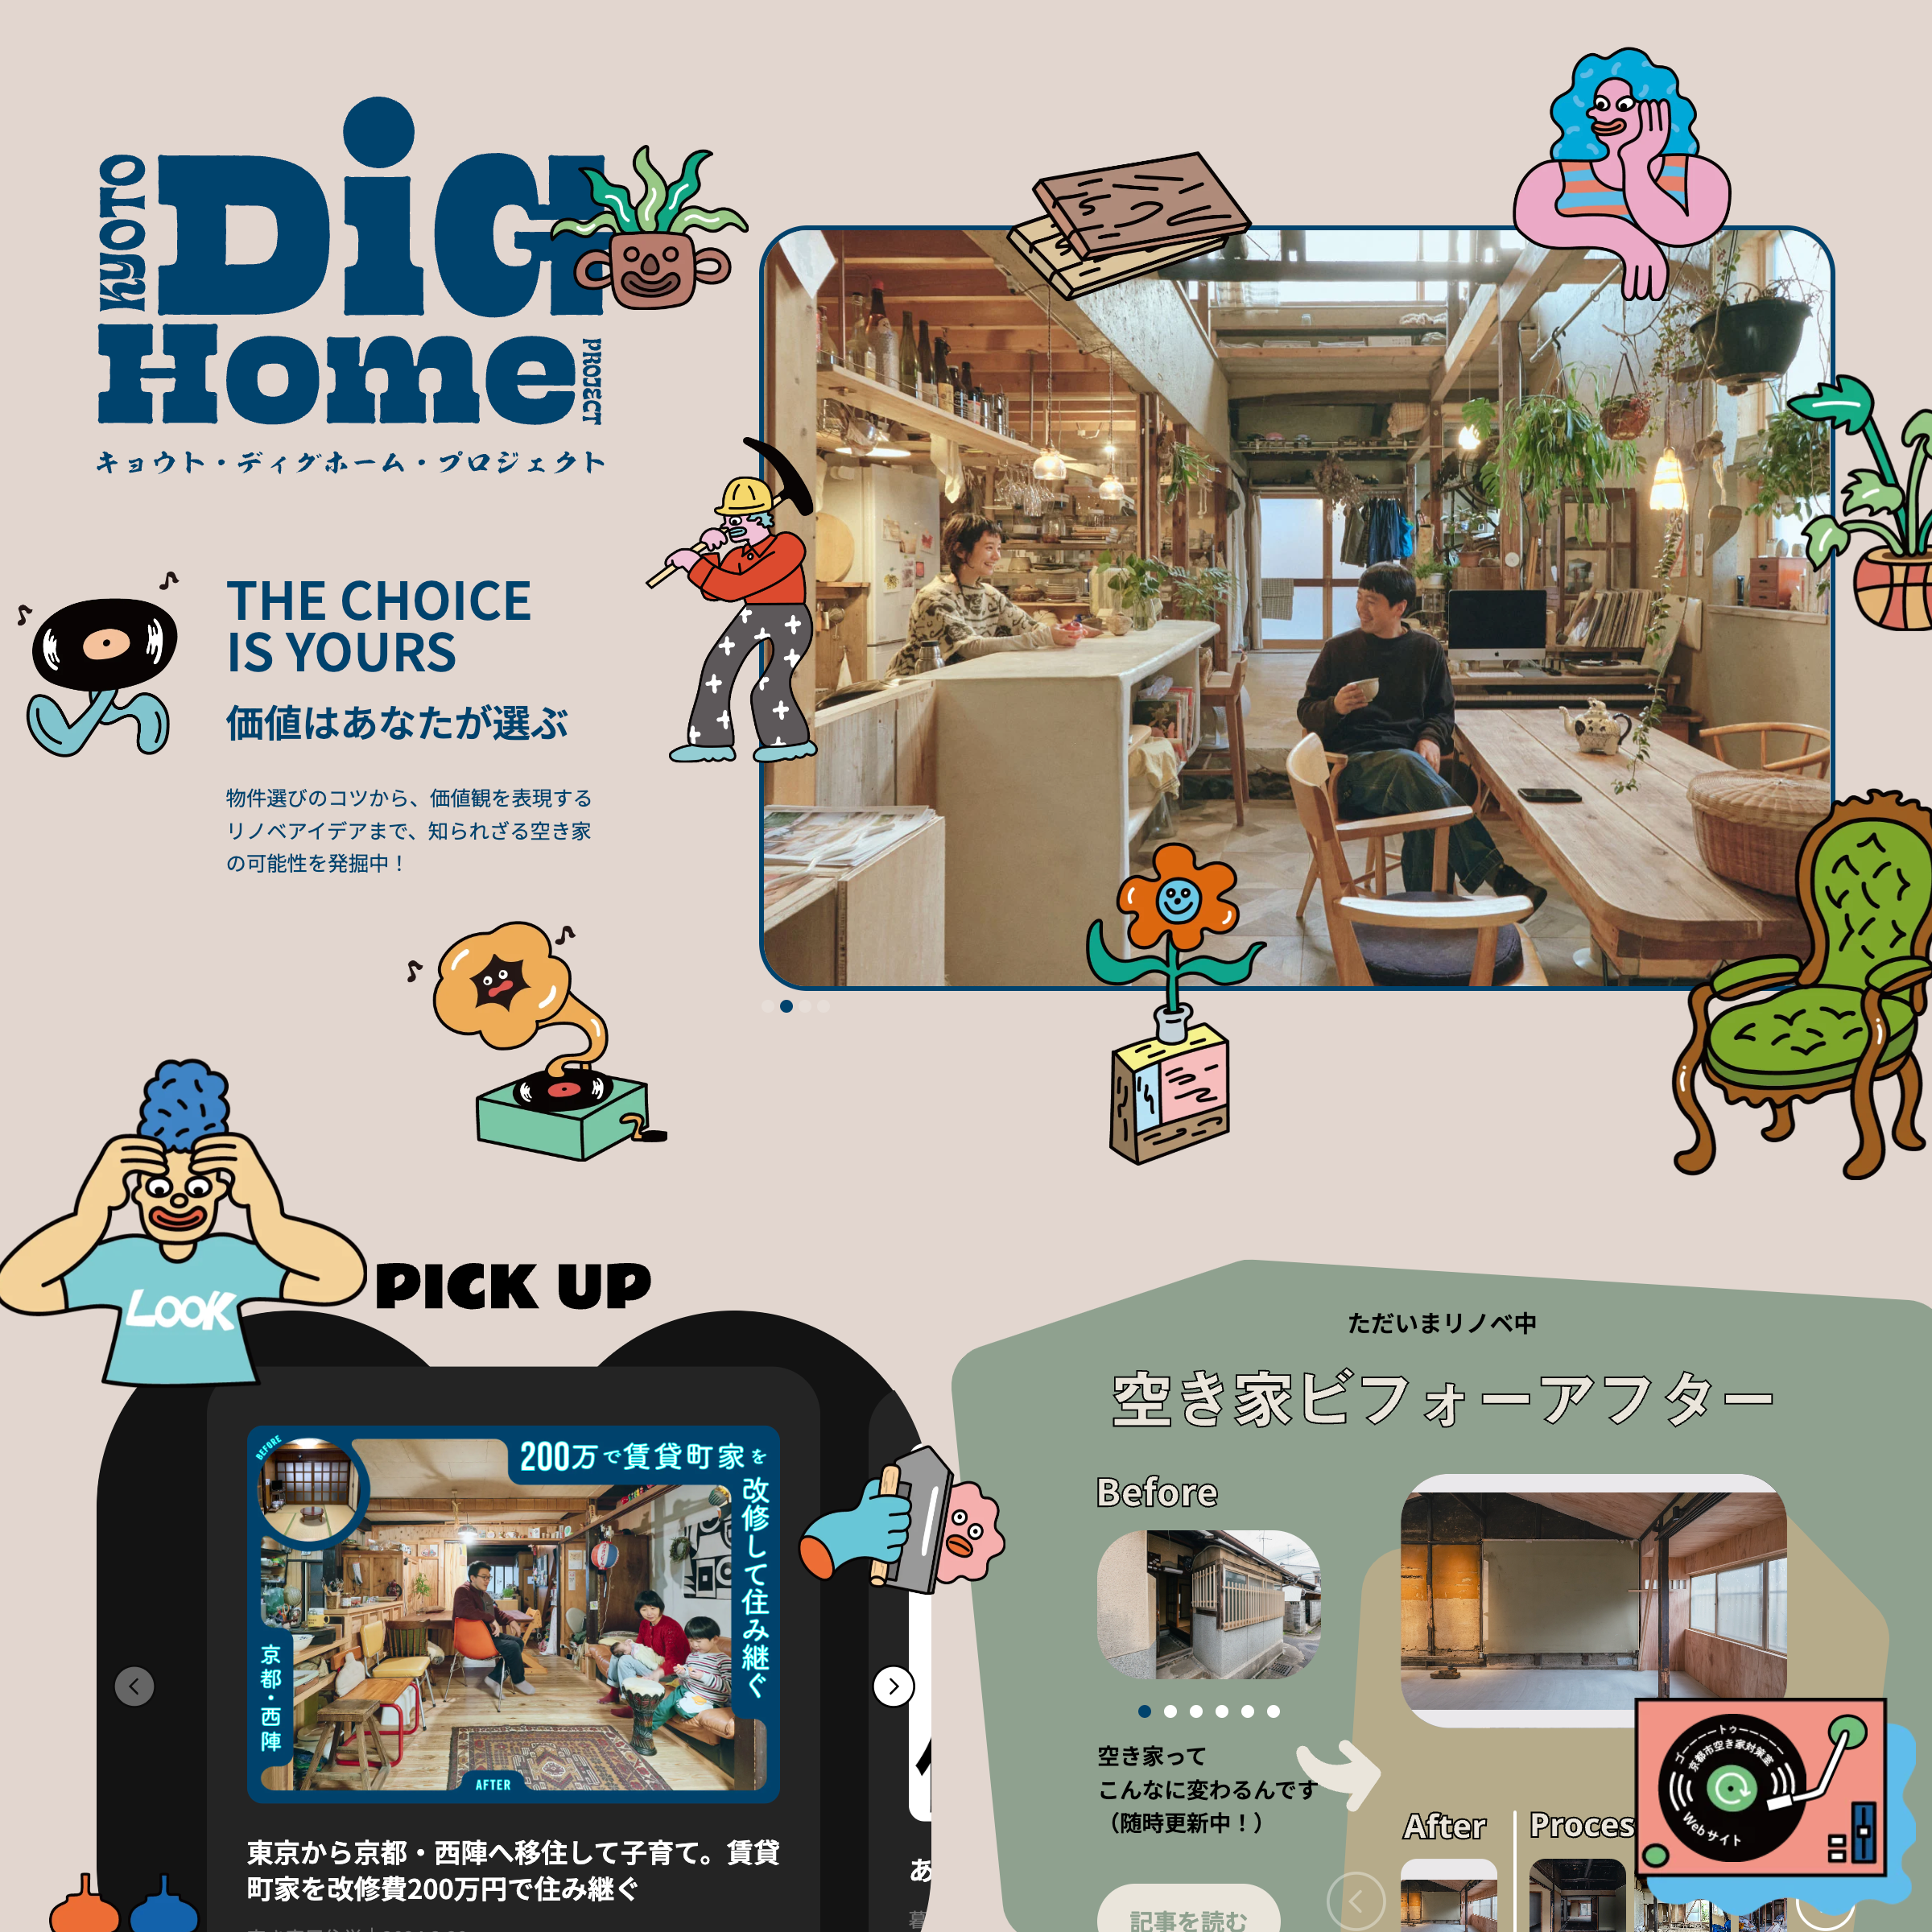 Kyoto Dig Home Projectのファーストビューの画像